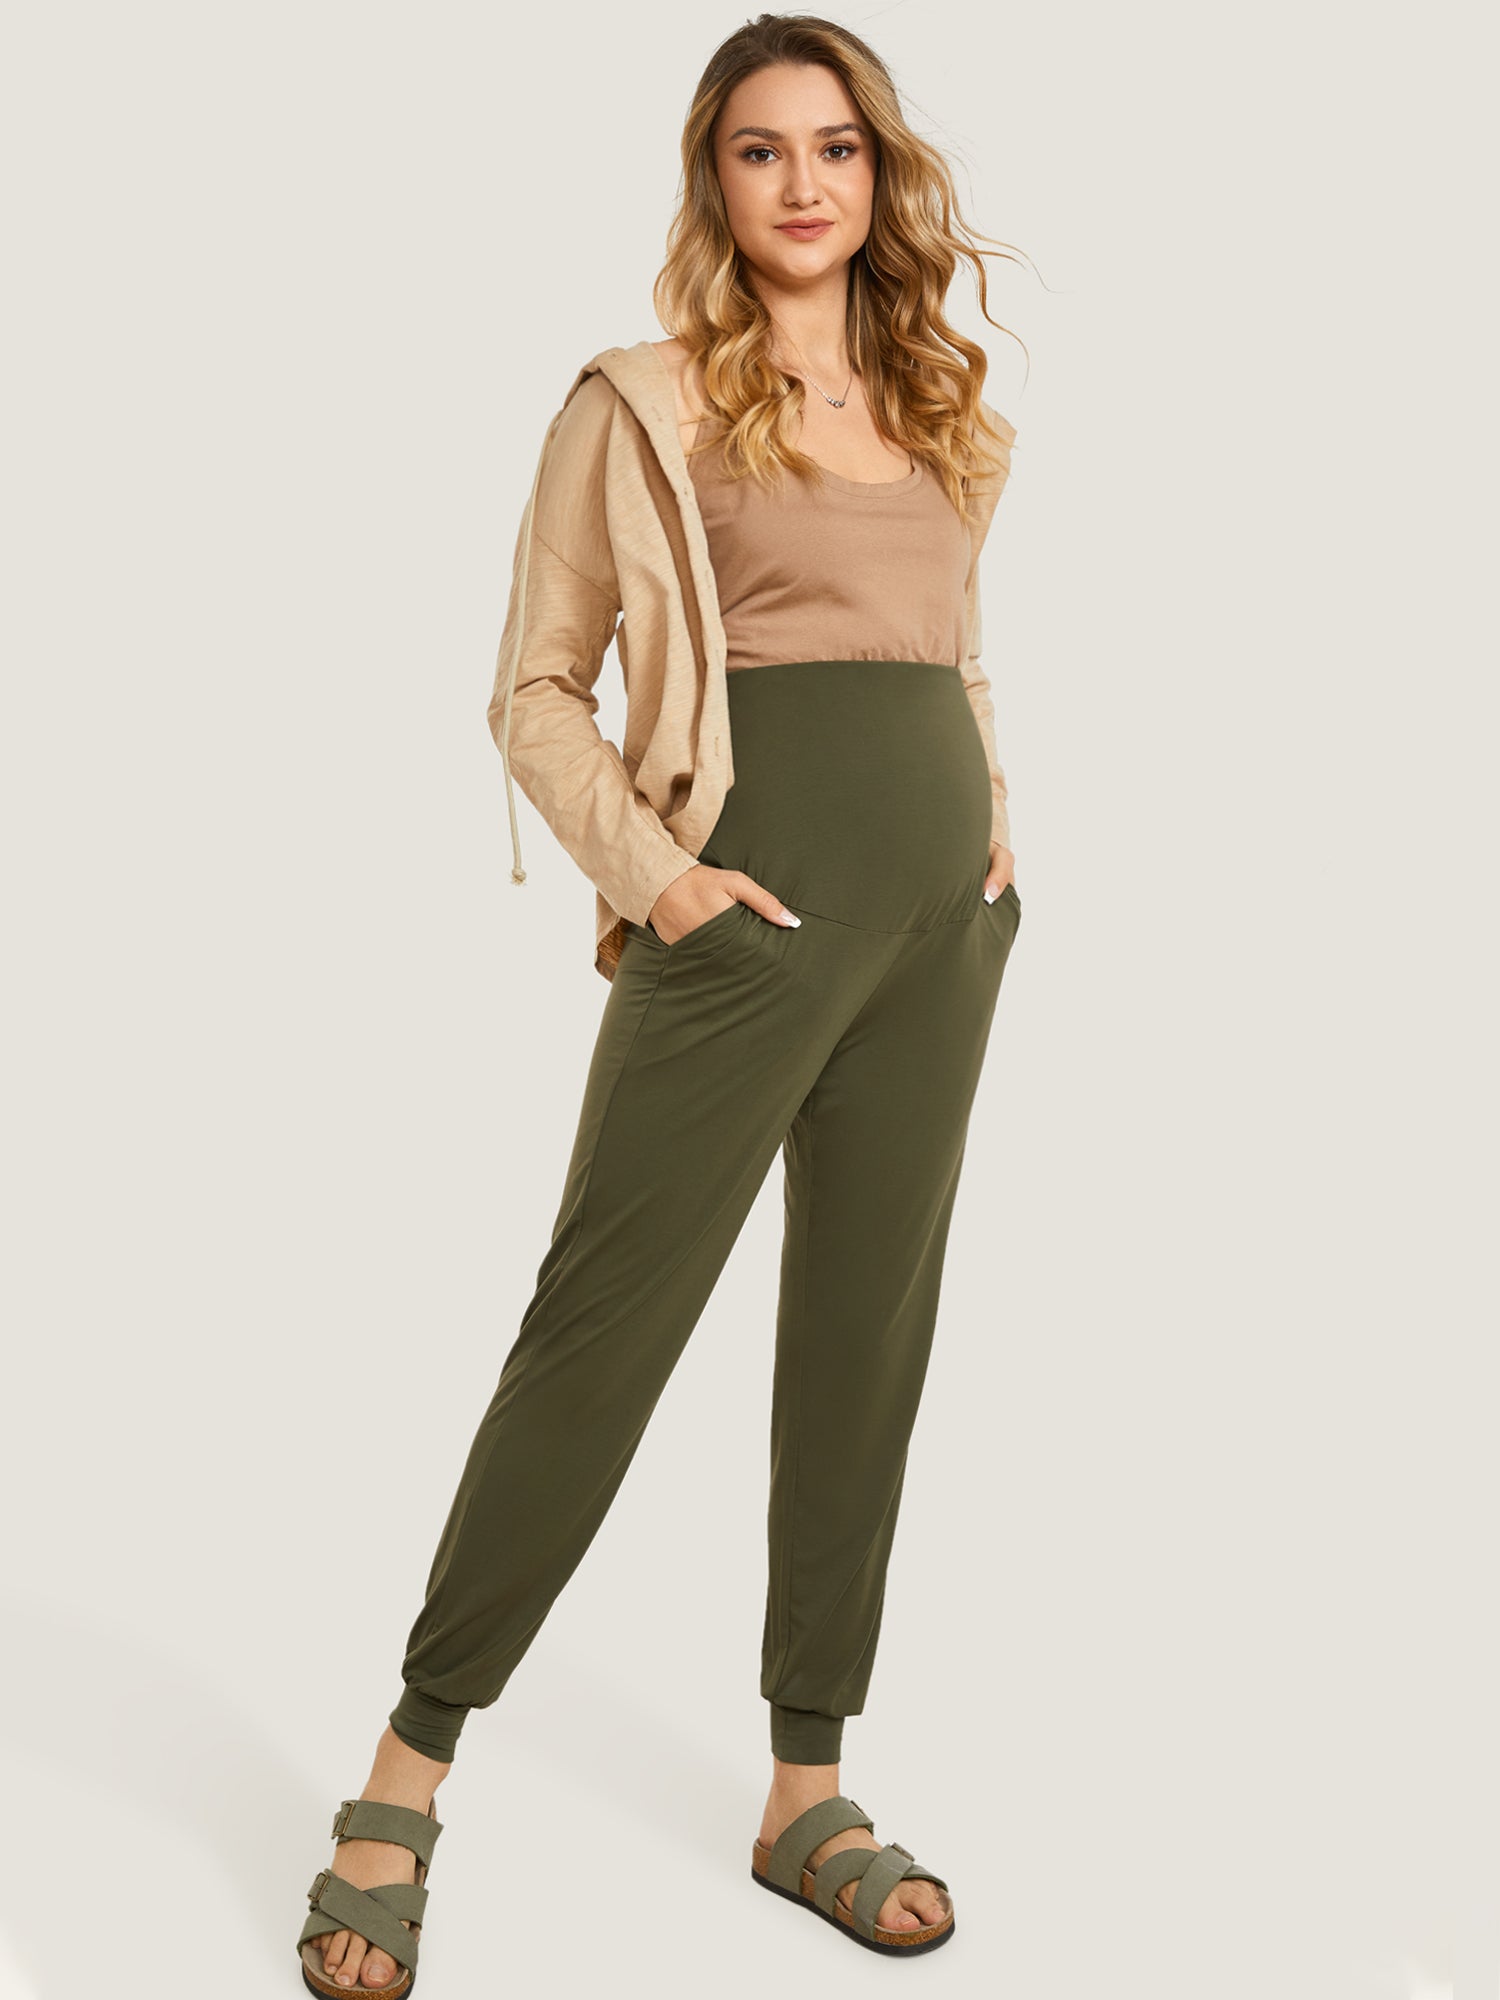 Casual Stretchy Maternity Joggers Warm green